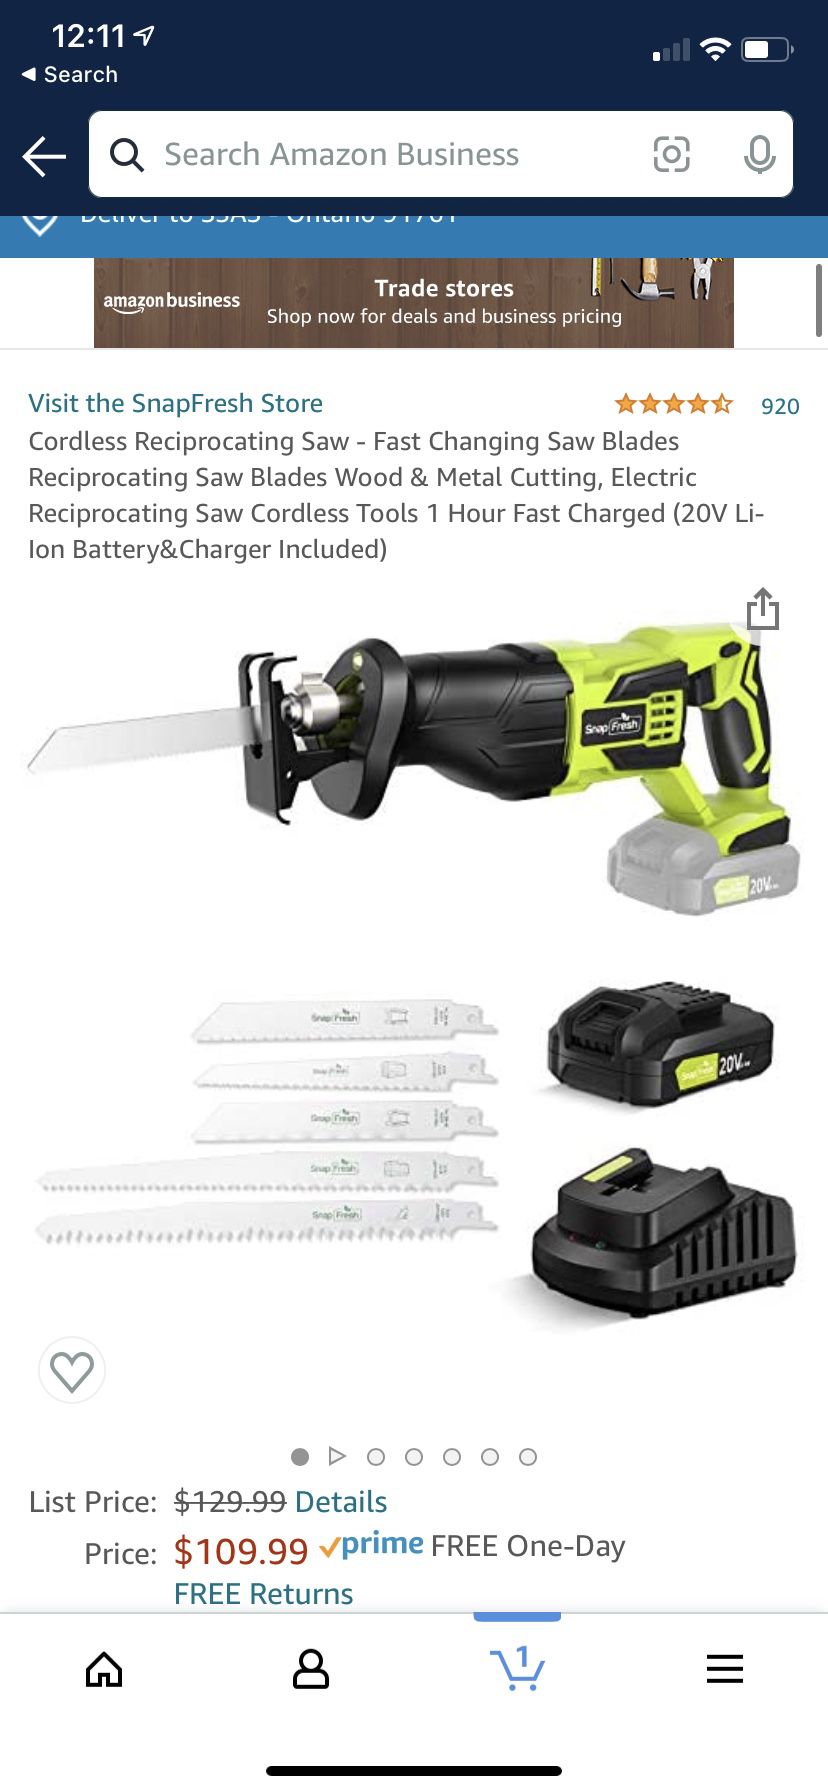 Cordless reciprocating saw- 20V Ali-Ion Battery & Charger